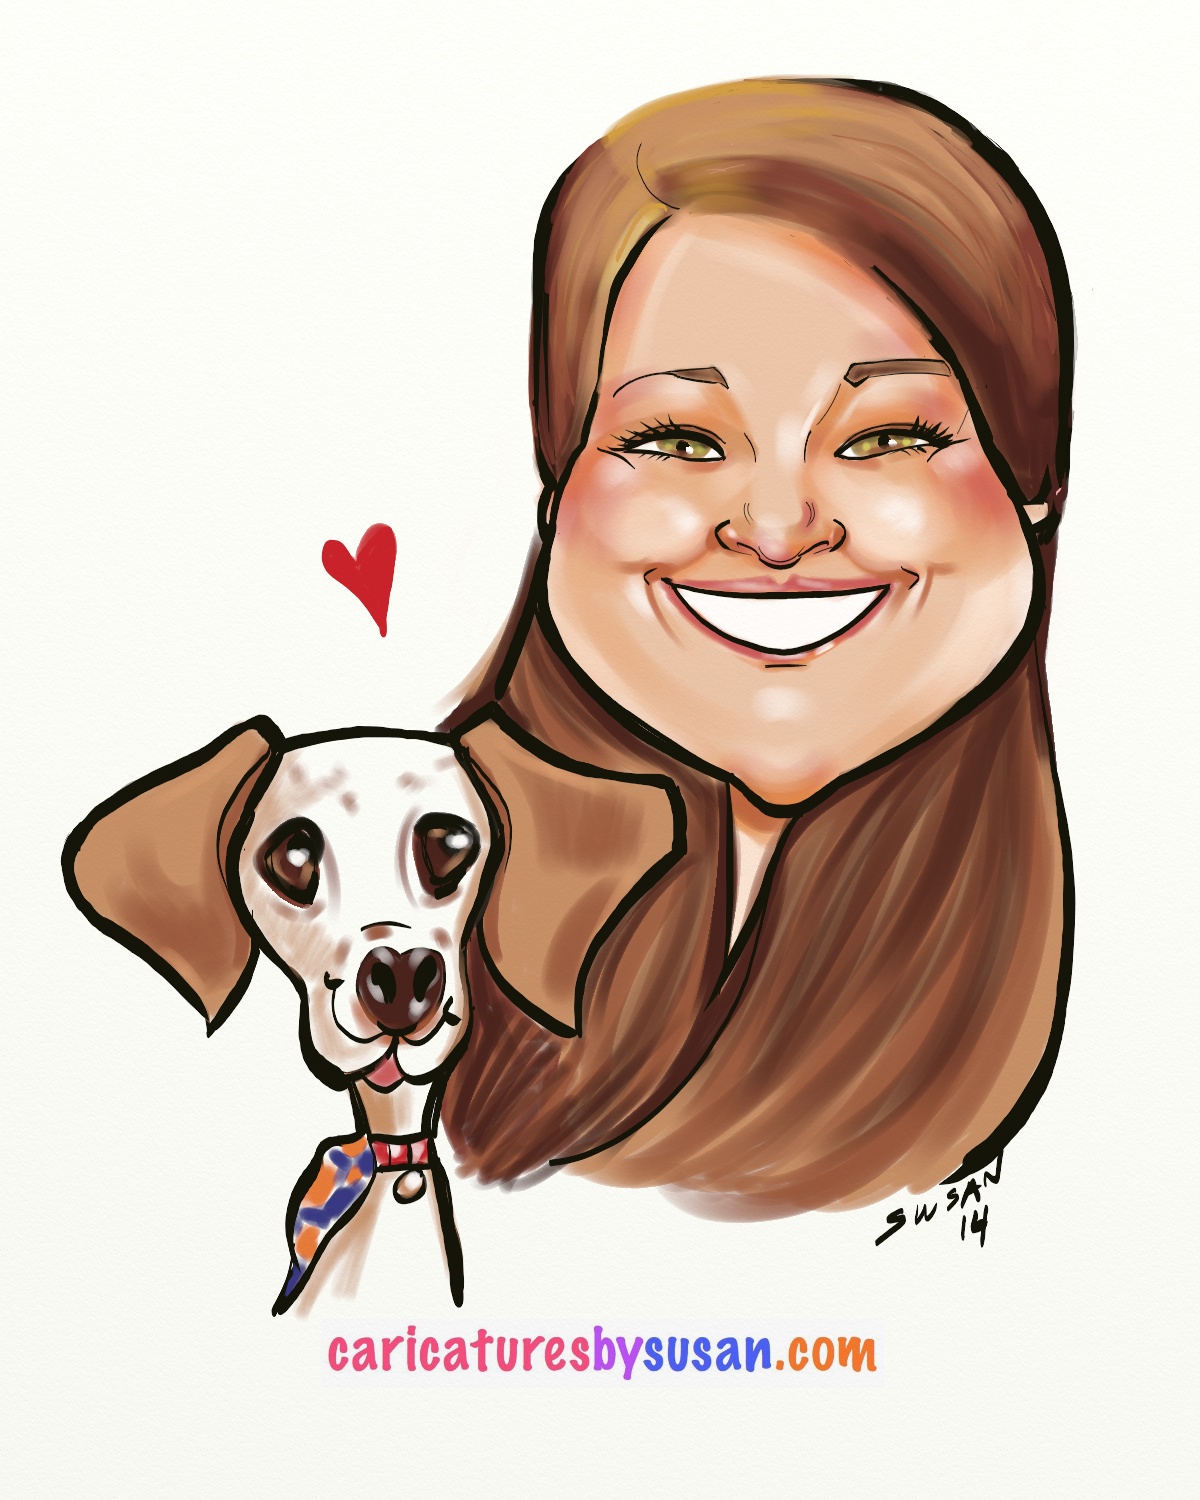 Digital caricature of young lady and her pet.